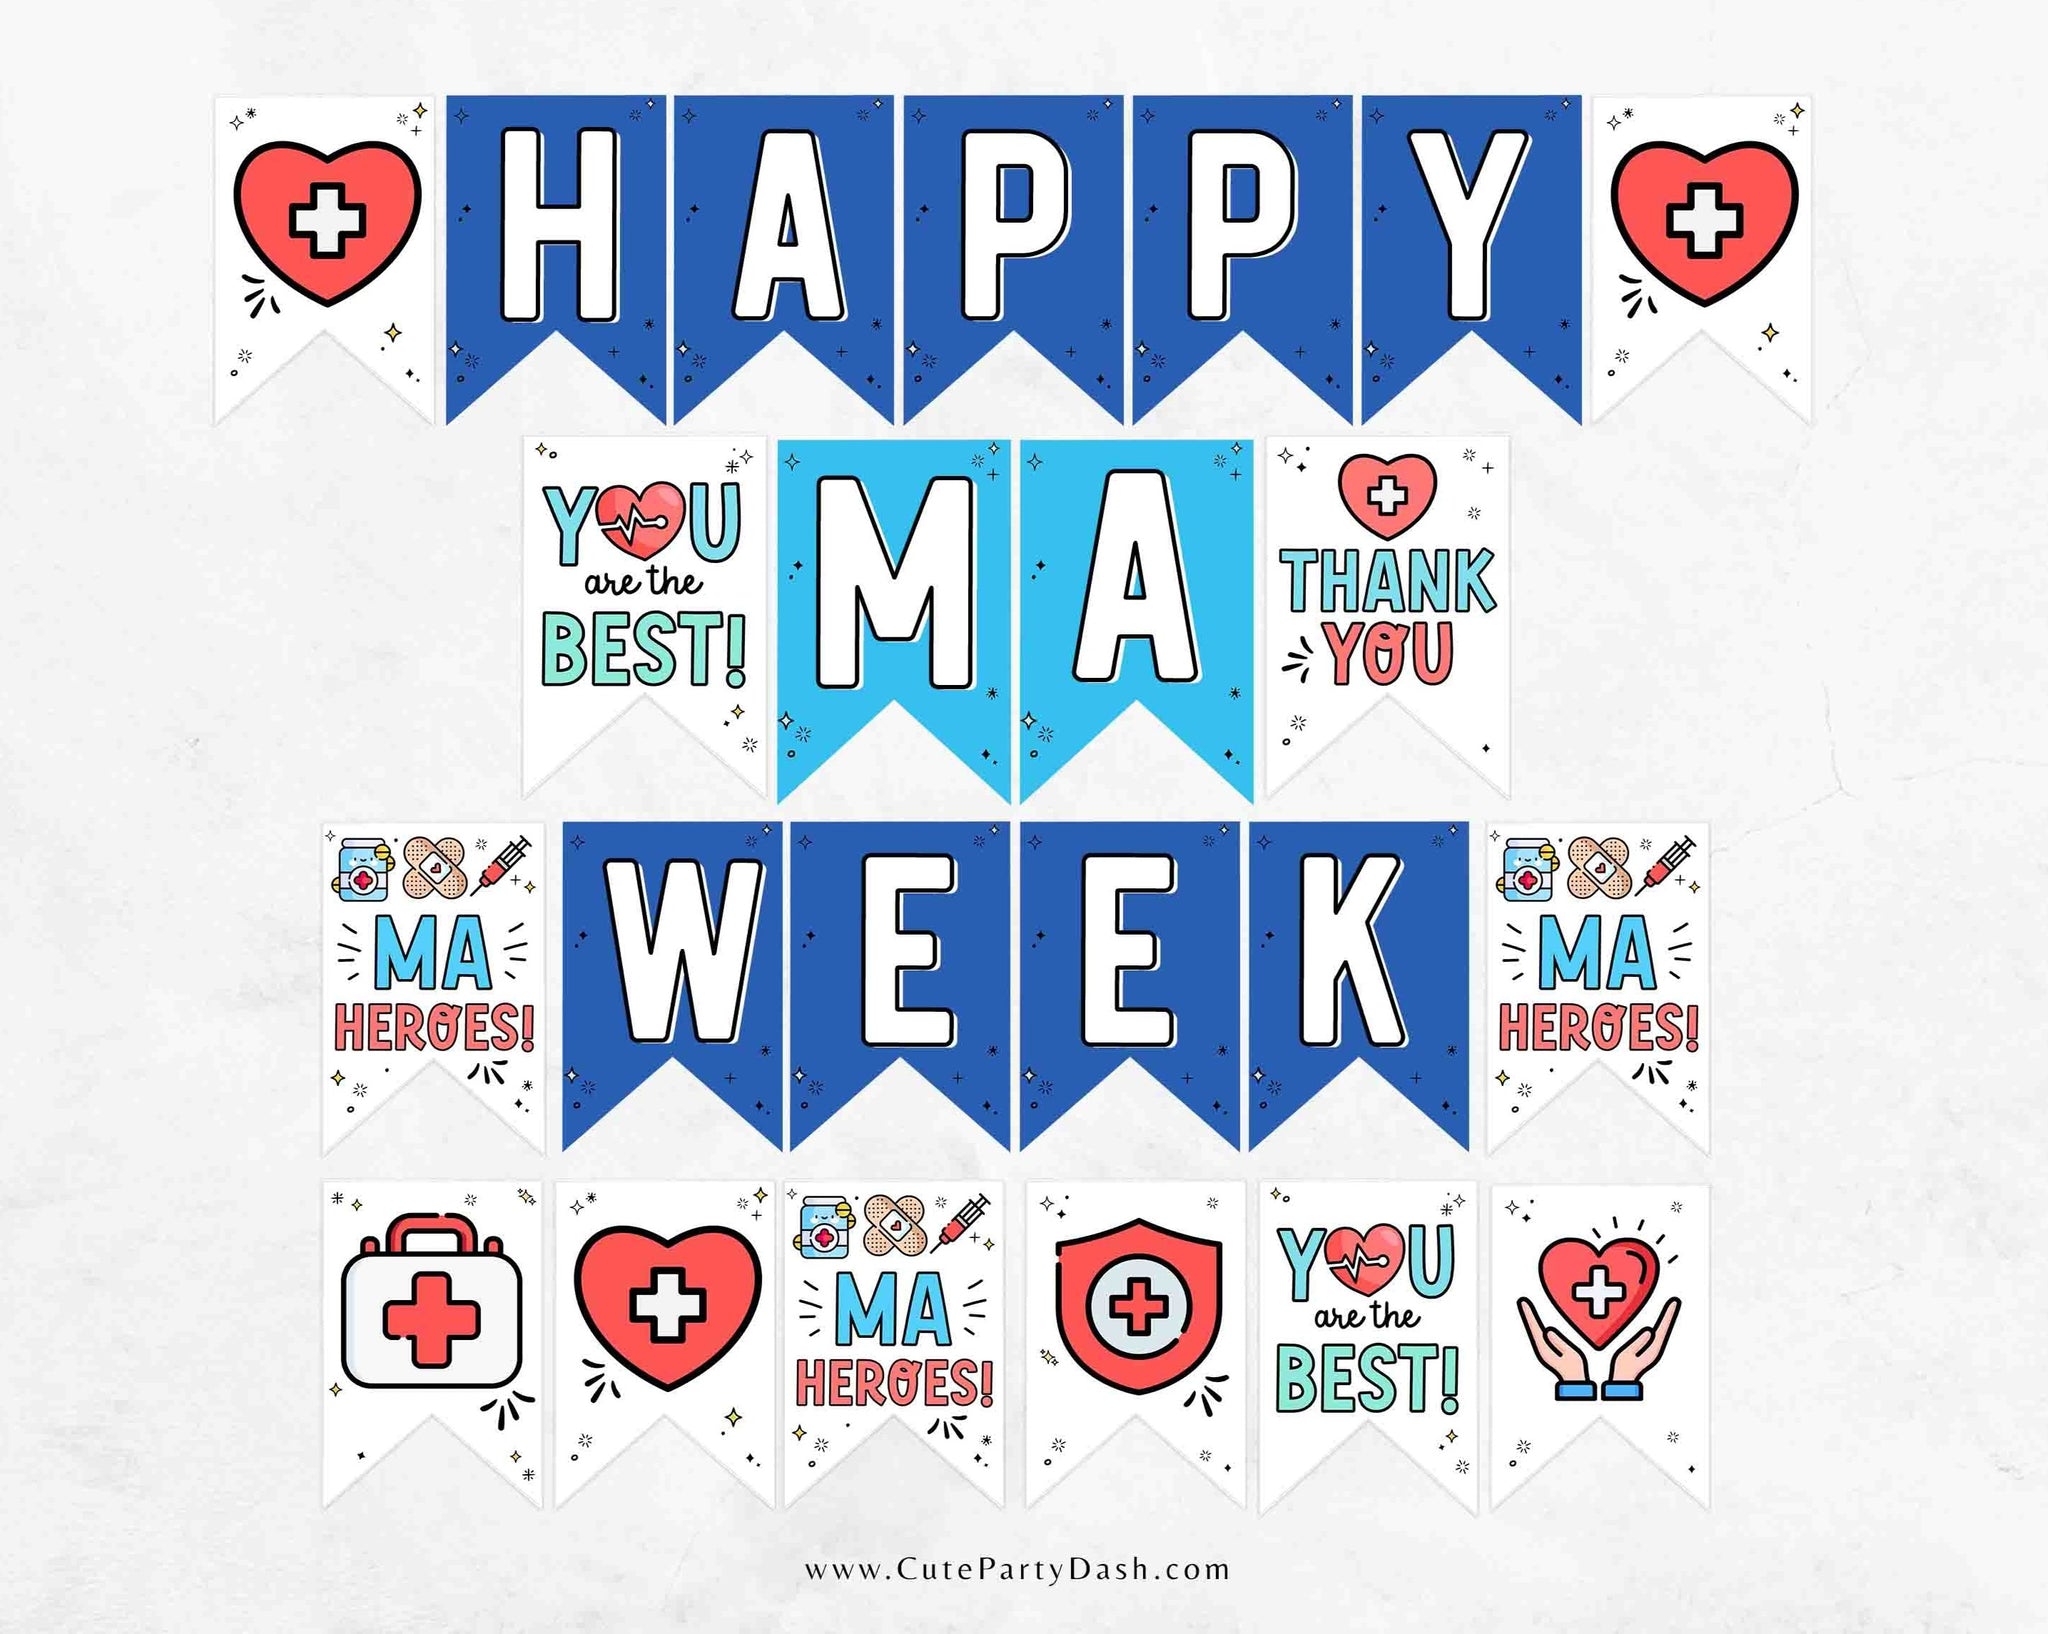 Medical Assistant Week Banner Printable INSTANT DOWNLOAD Editable Happy MA Appreciation Week Bunting Decor Medical Assistant Recognition